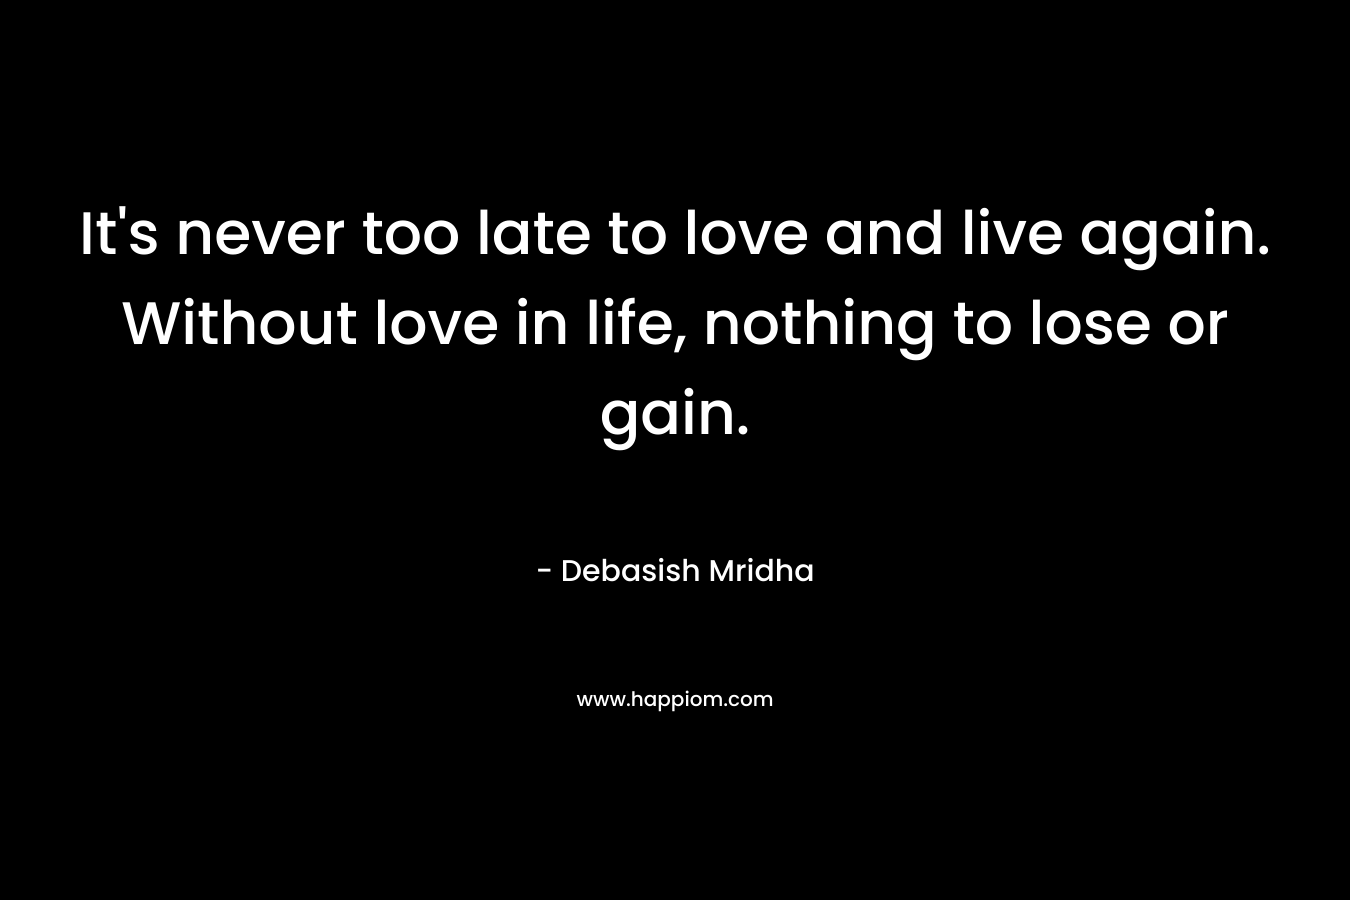 It's never too late to love and live again. Without love in life, nothing to lose or gain.